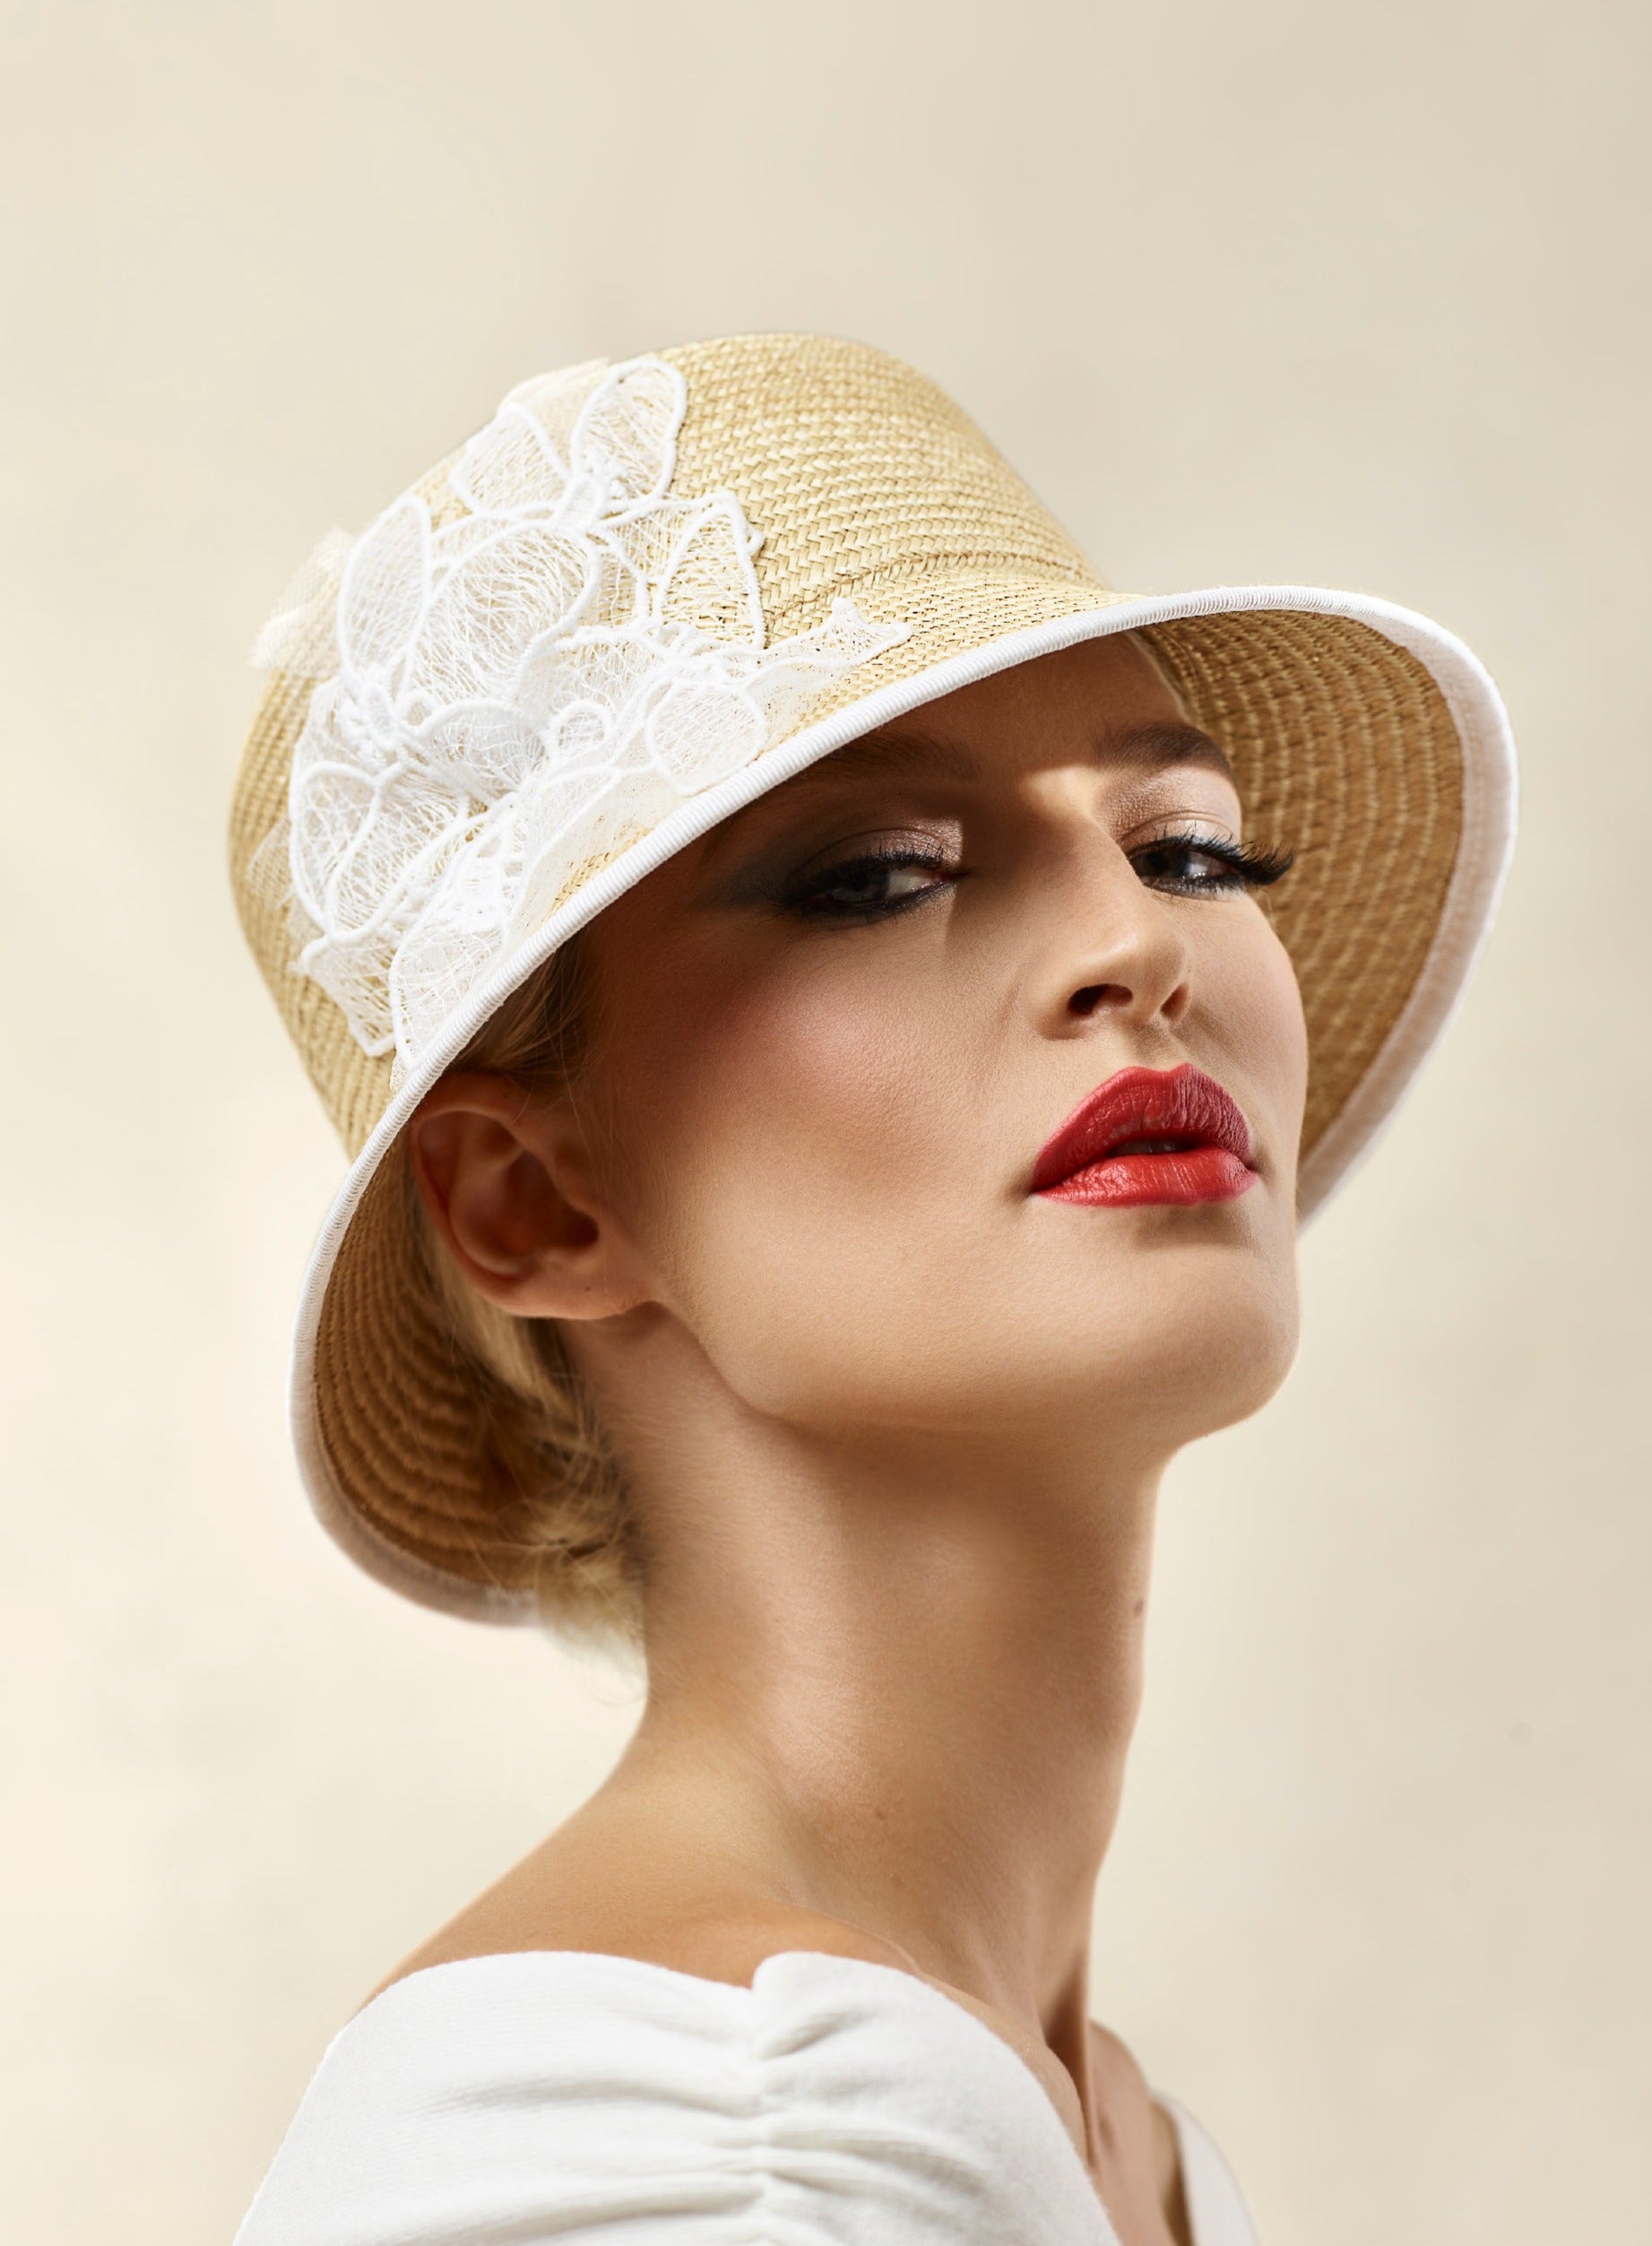 Misa Harada Hats| COSMO | Bucket hat in Bucket hat in nante straw, with white tulle and 3D applique flowers